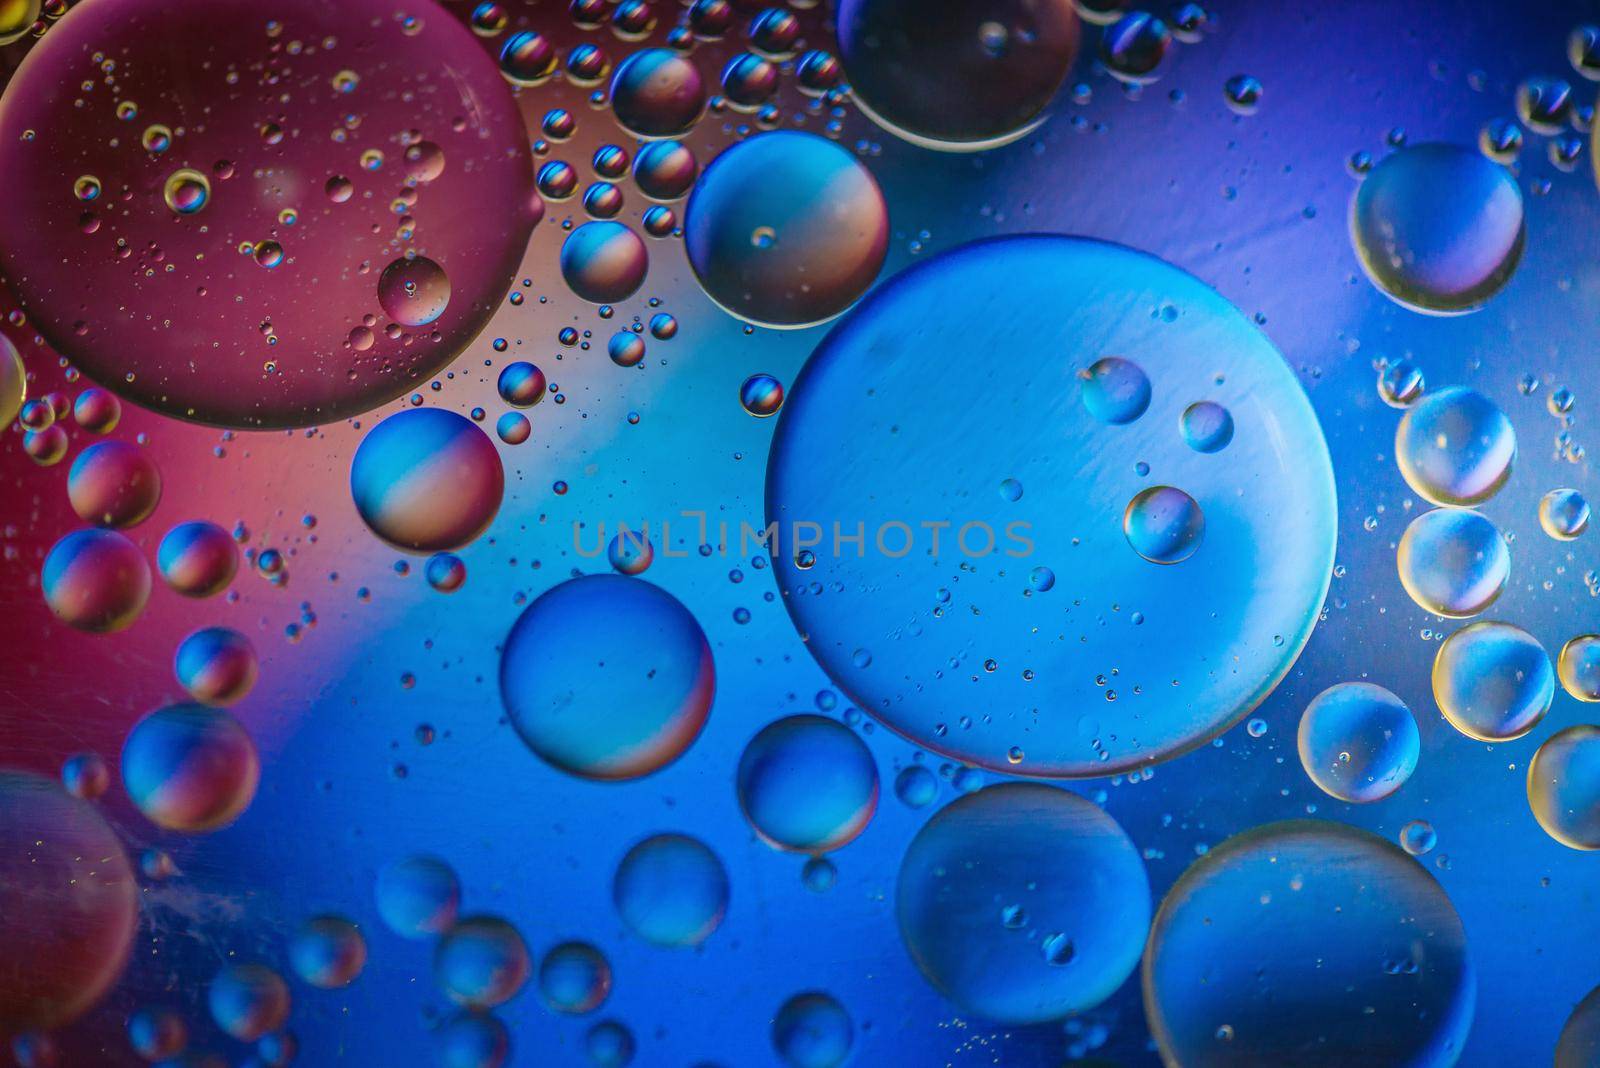 Multicolored abstract defocused background picture made with oil, water and soap by anytka